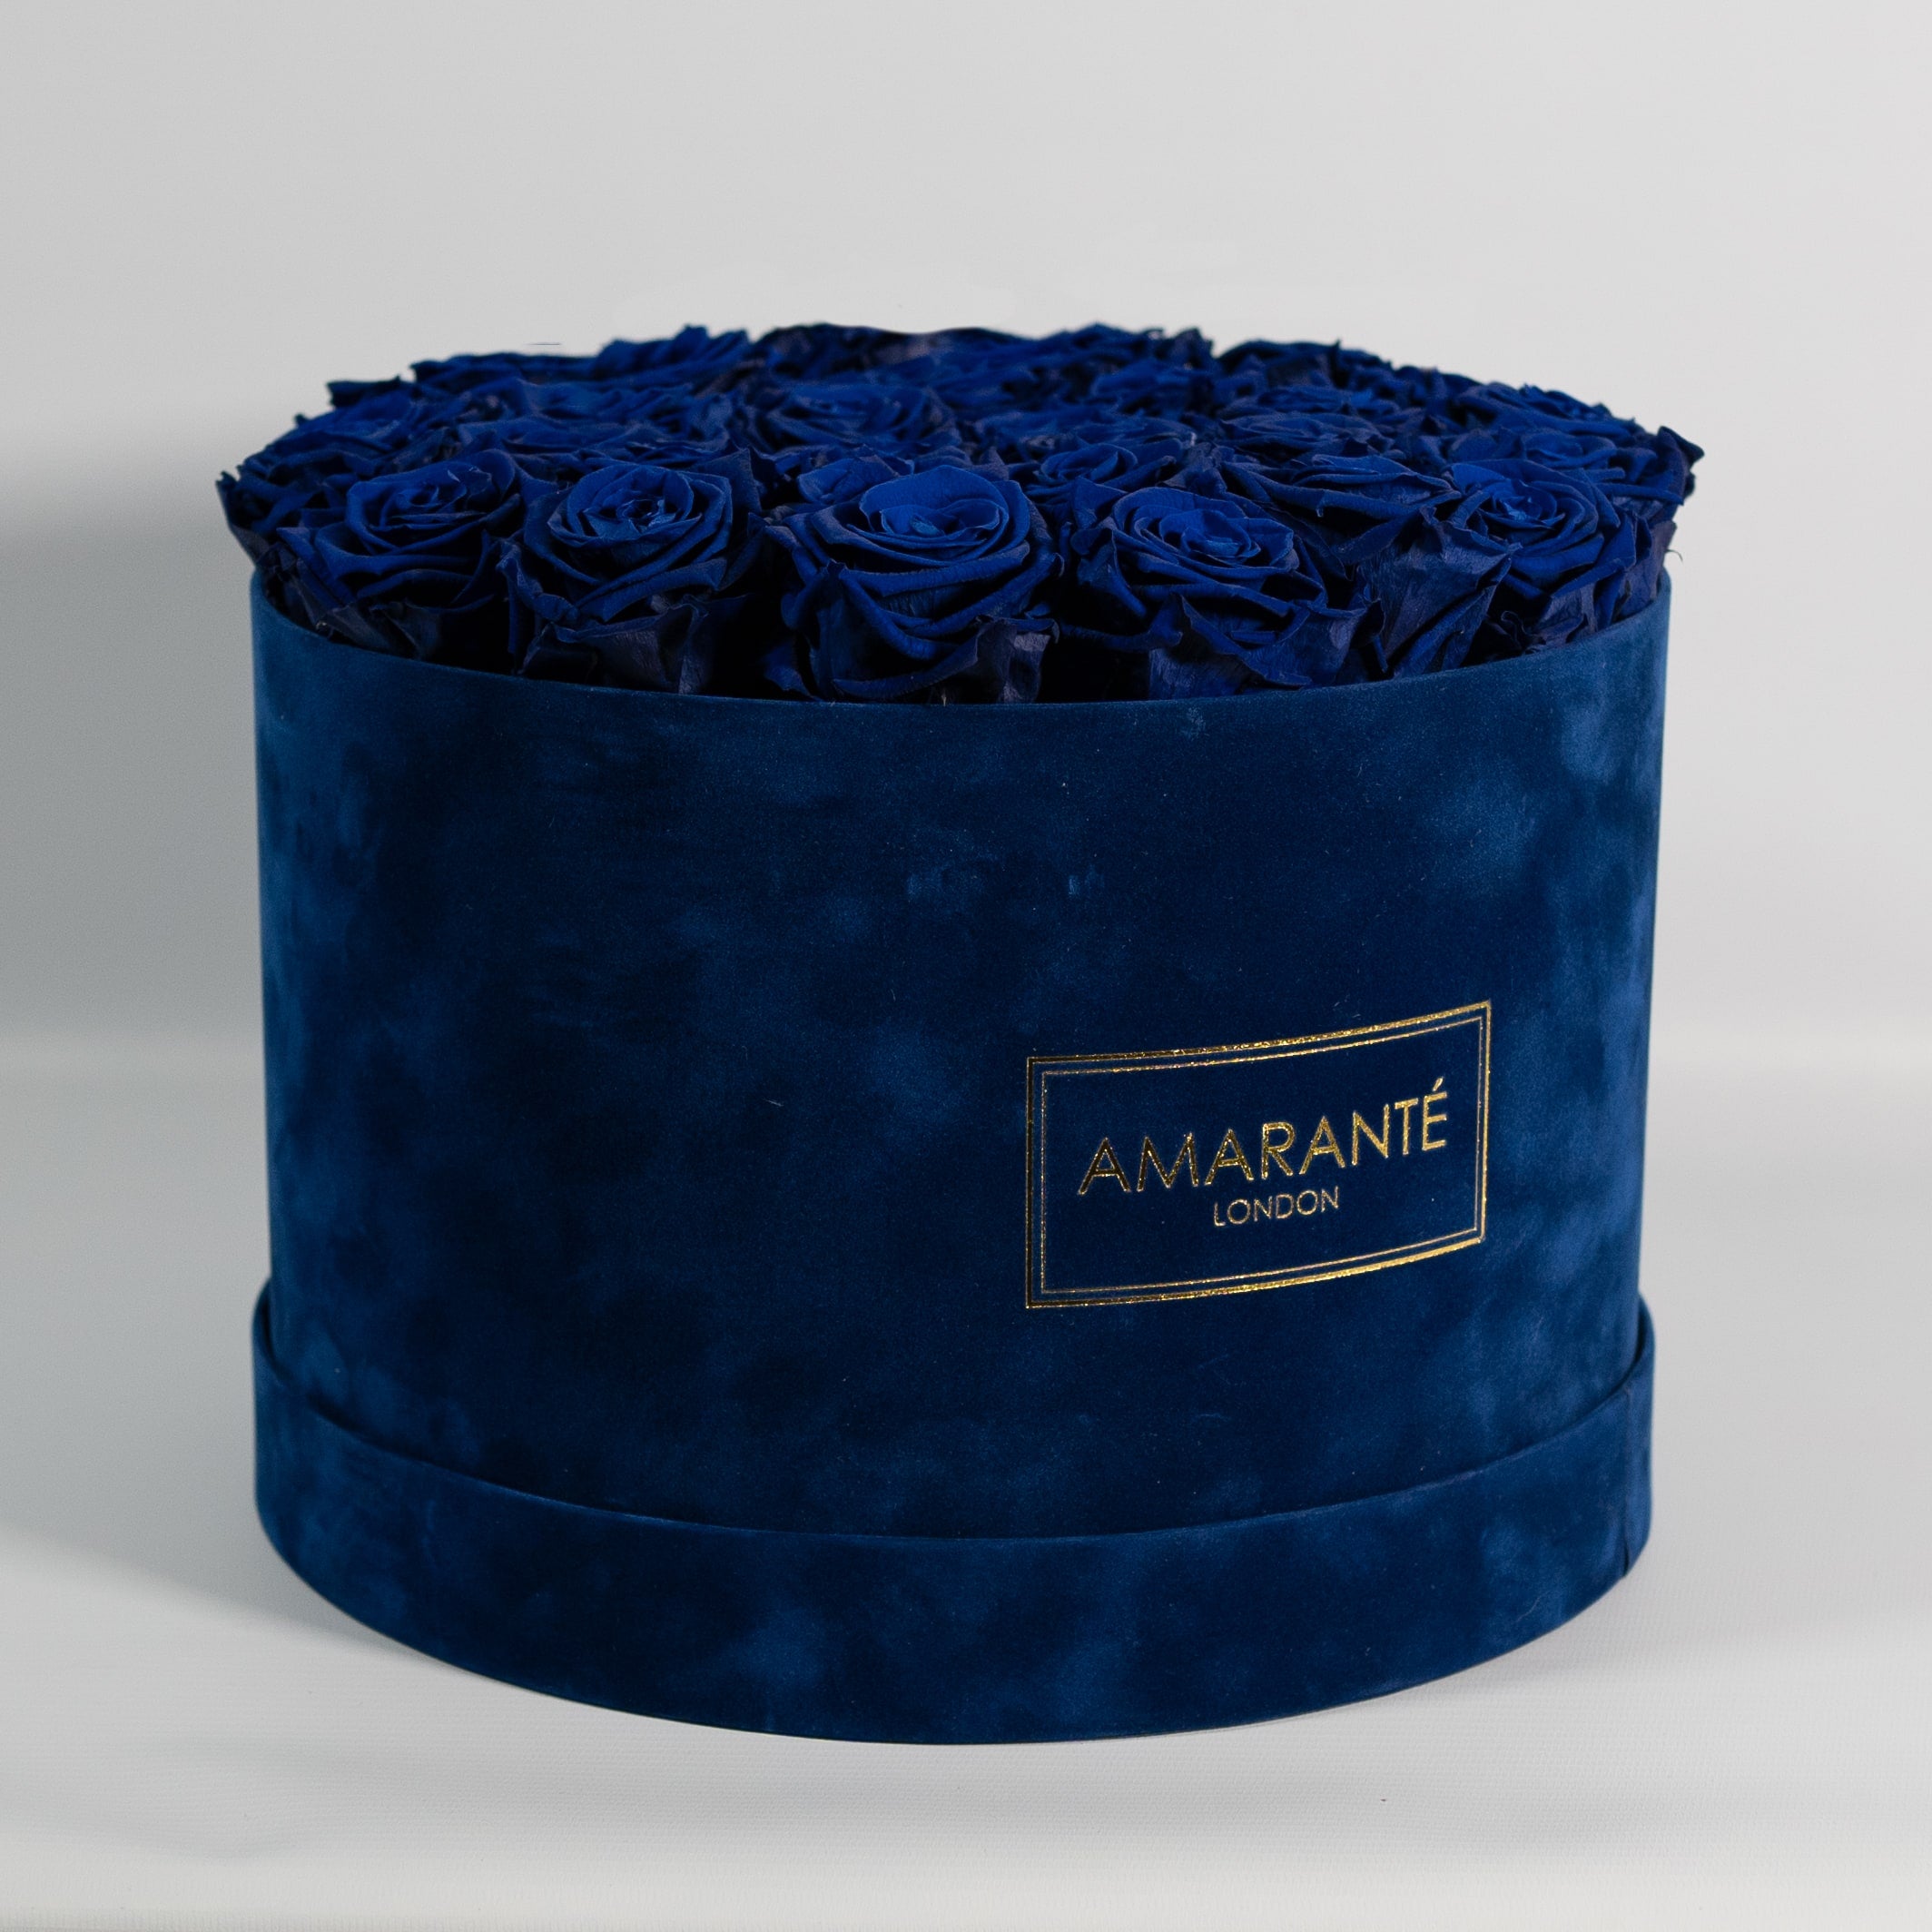 These elegant roses denote protection security, and royalty. 